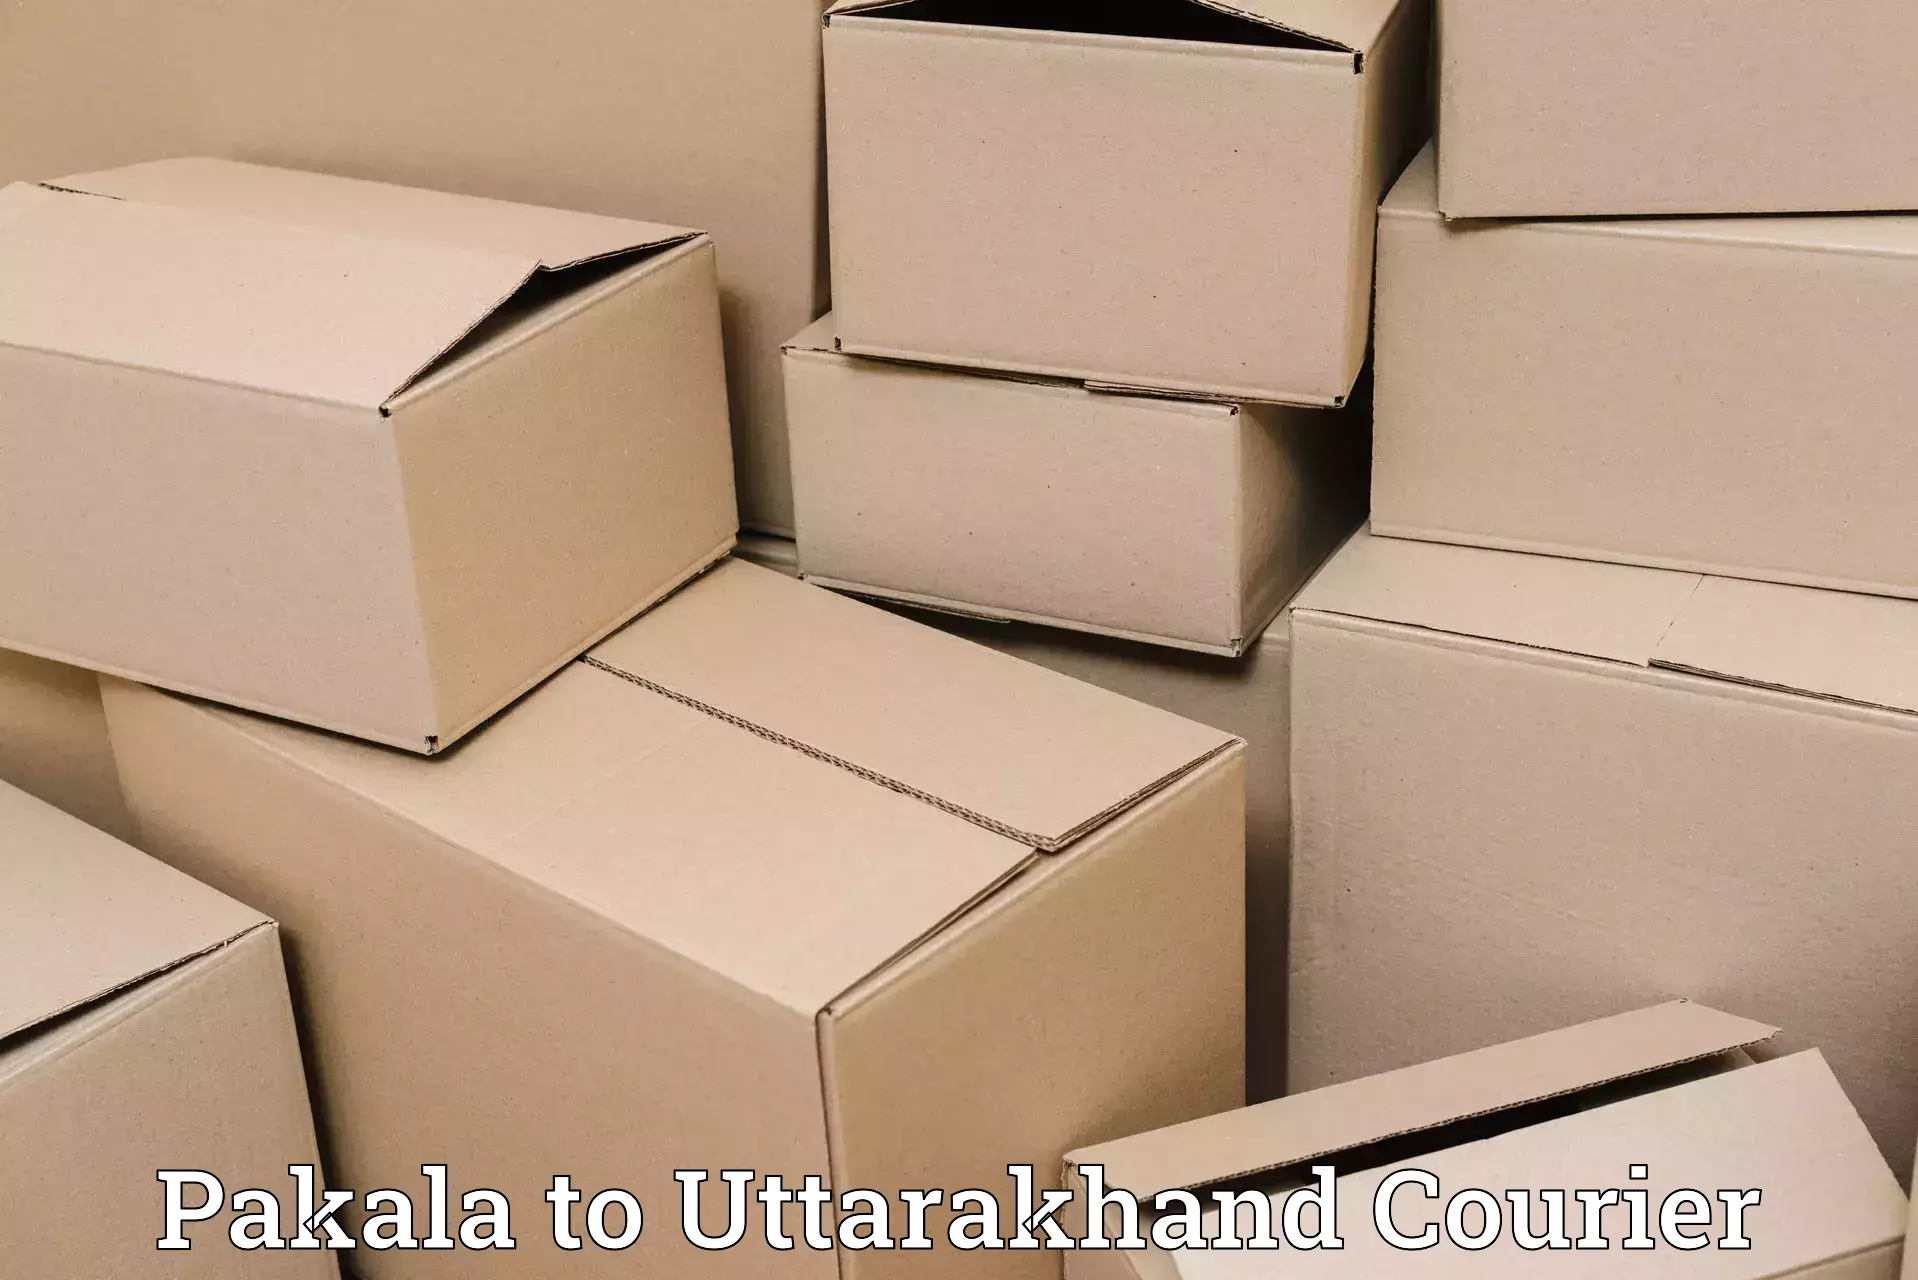 Seamless shipping experience in Pakala to Rudrapur